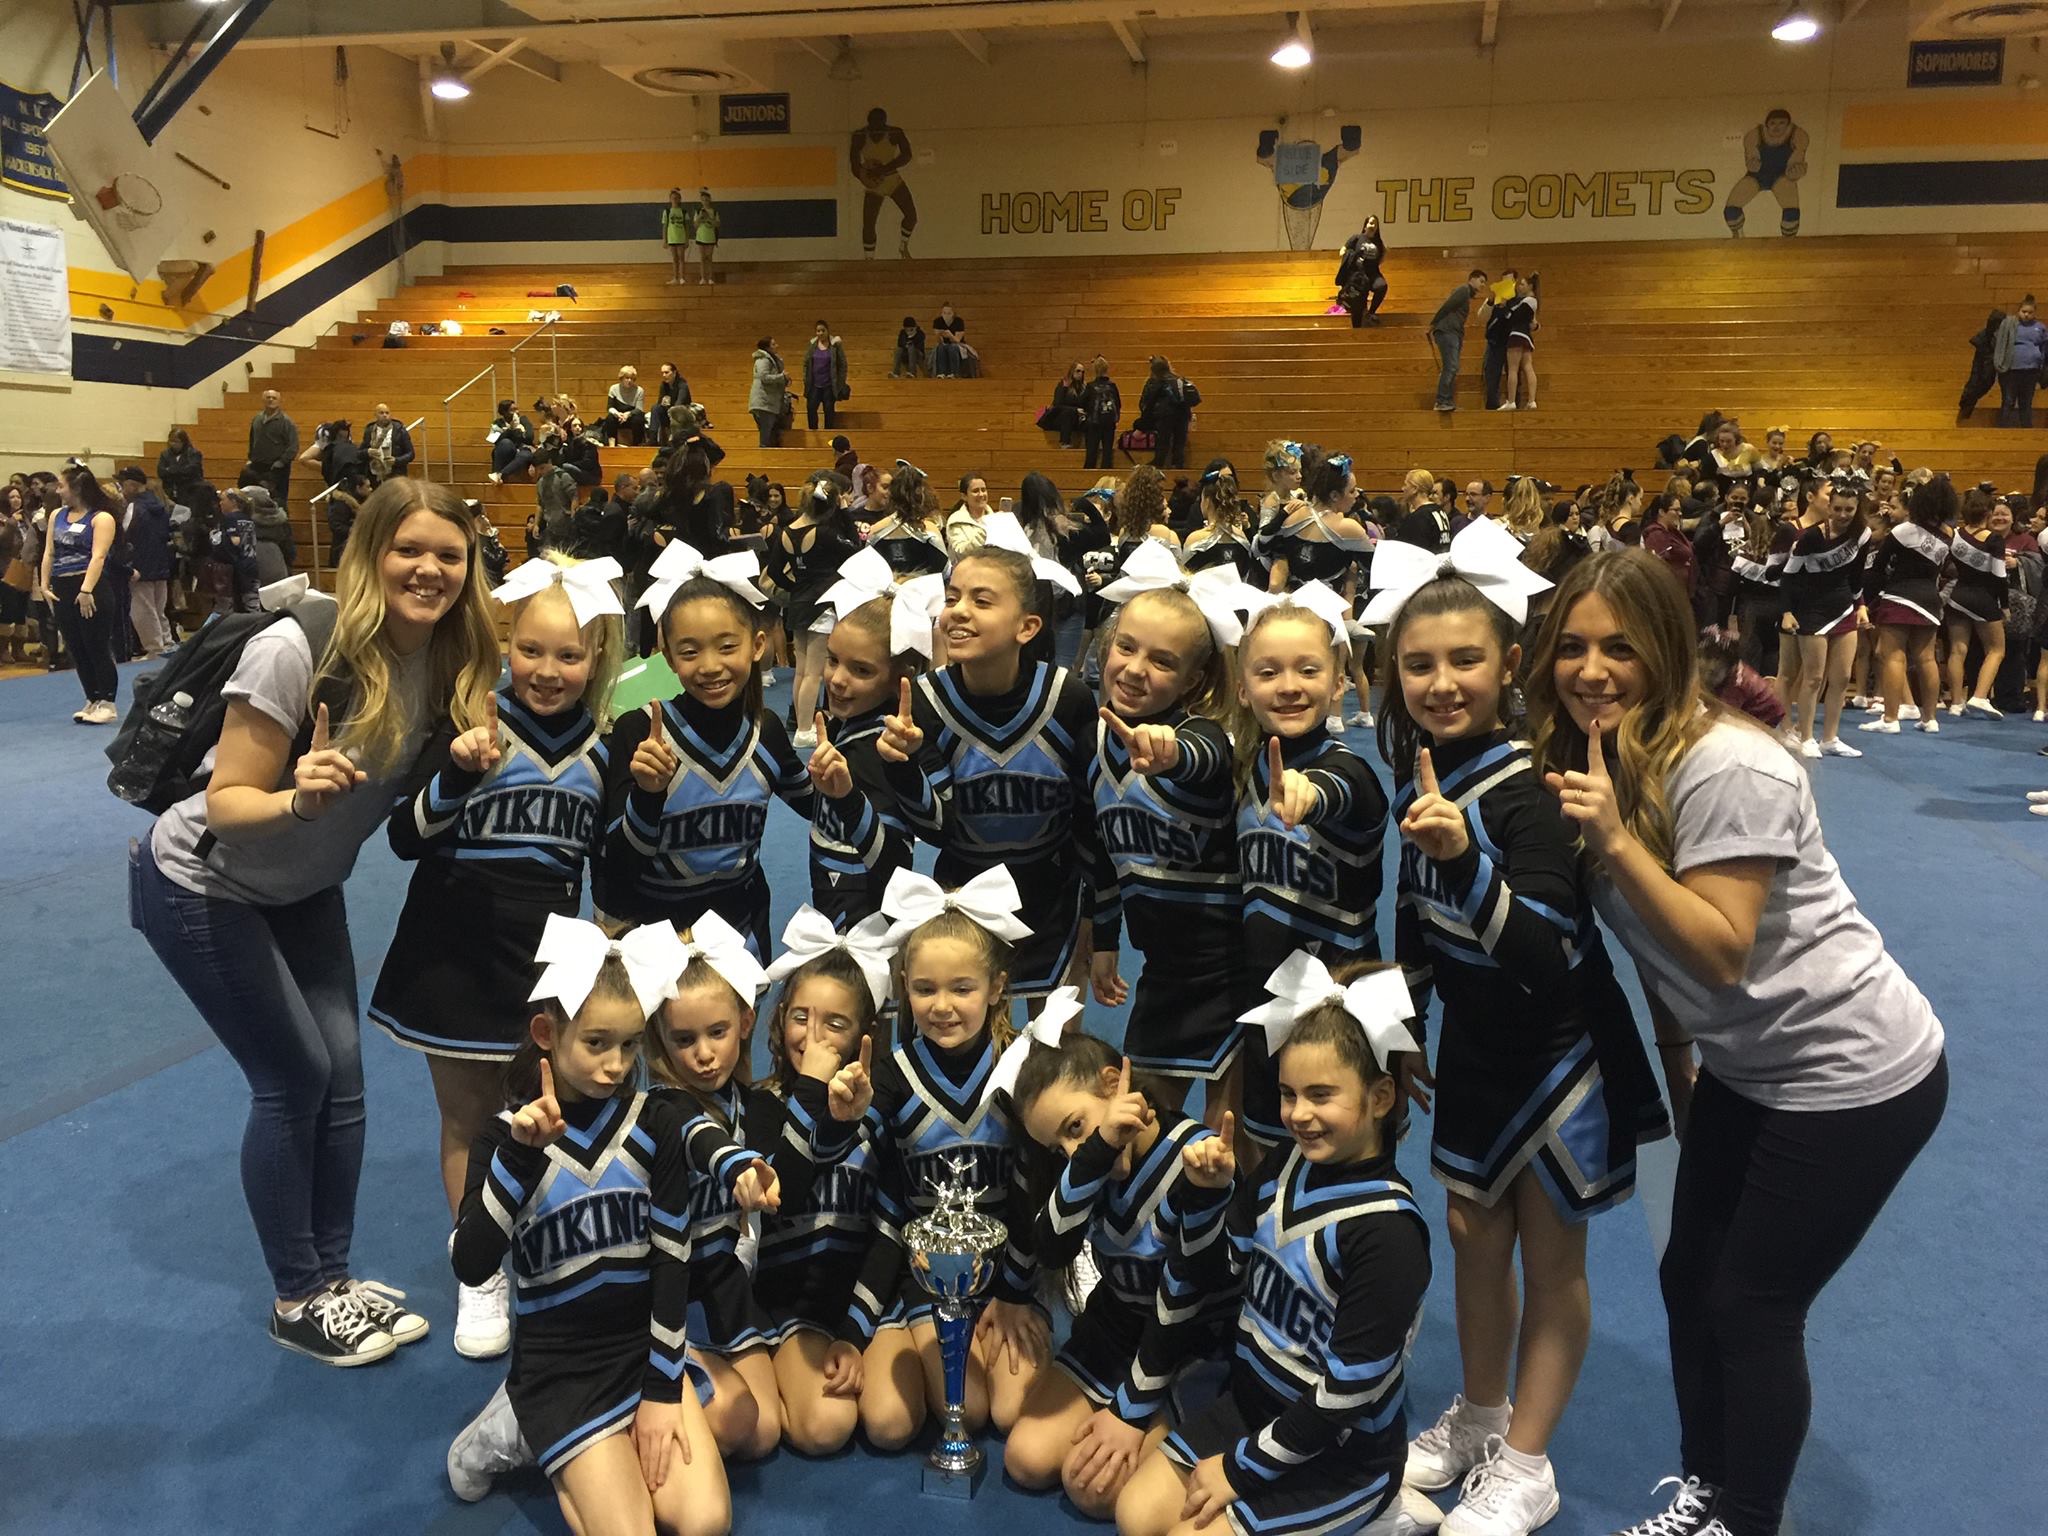 The Mini Little Vikings Competition Cheer takes First Place at Hackensack High School